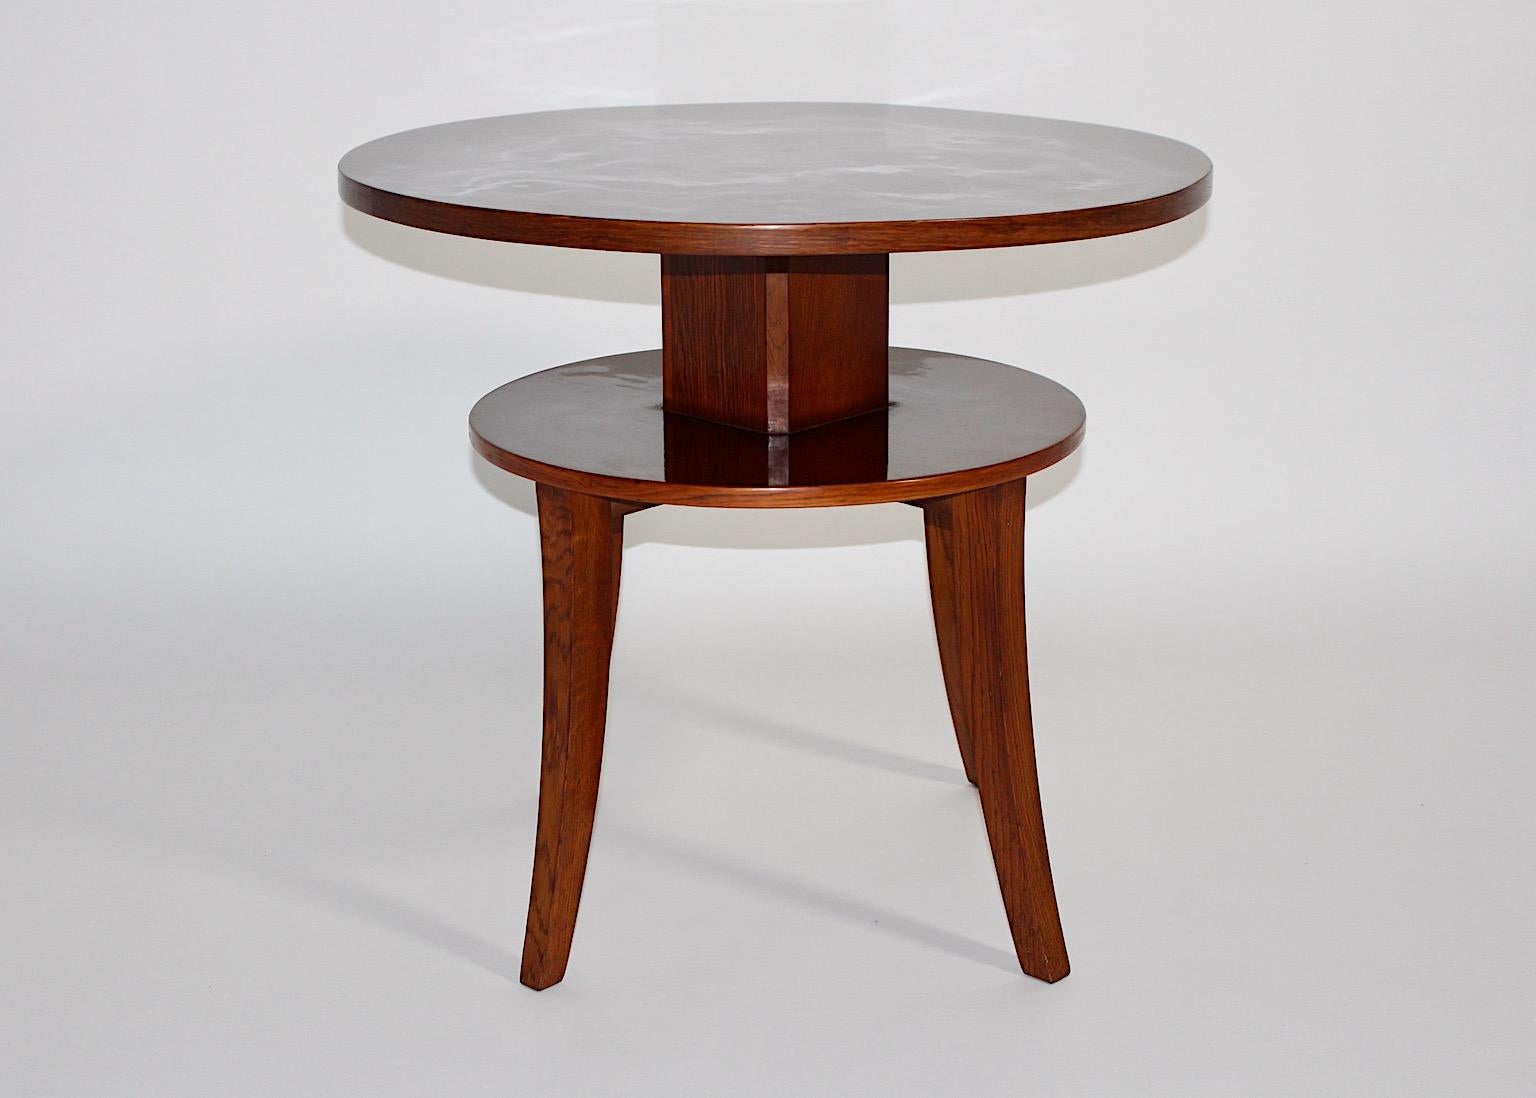 Art Deco organic circular two tier coffee table or side table from walnut and oak circa 1925 Vienna.
An amazing coffee table or side table from walnut and oak with two tiers and slightly curved legs. Both tops are connected with a squared stem.
With